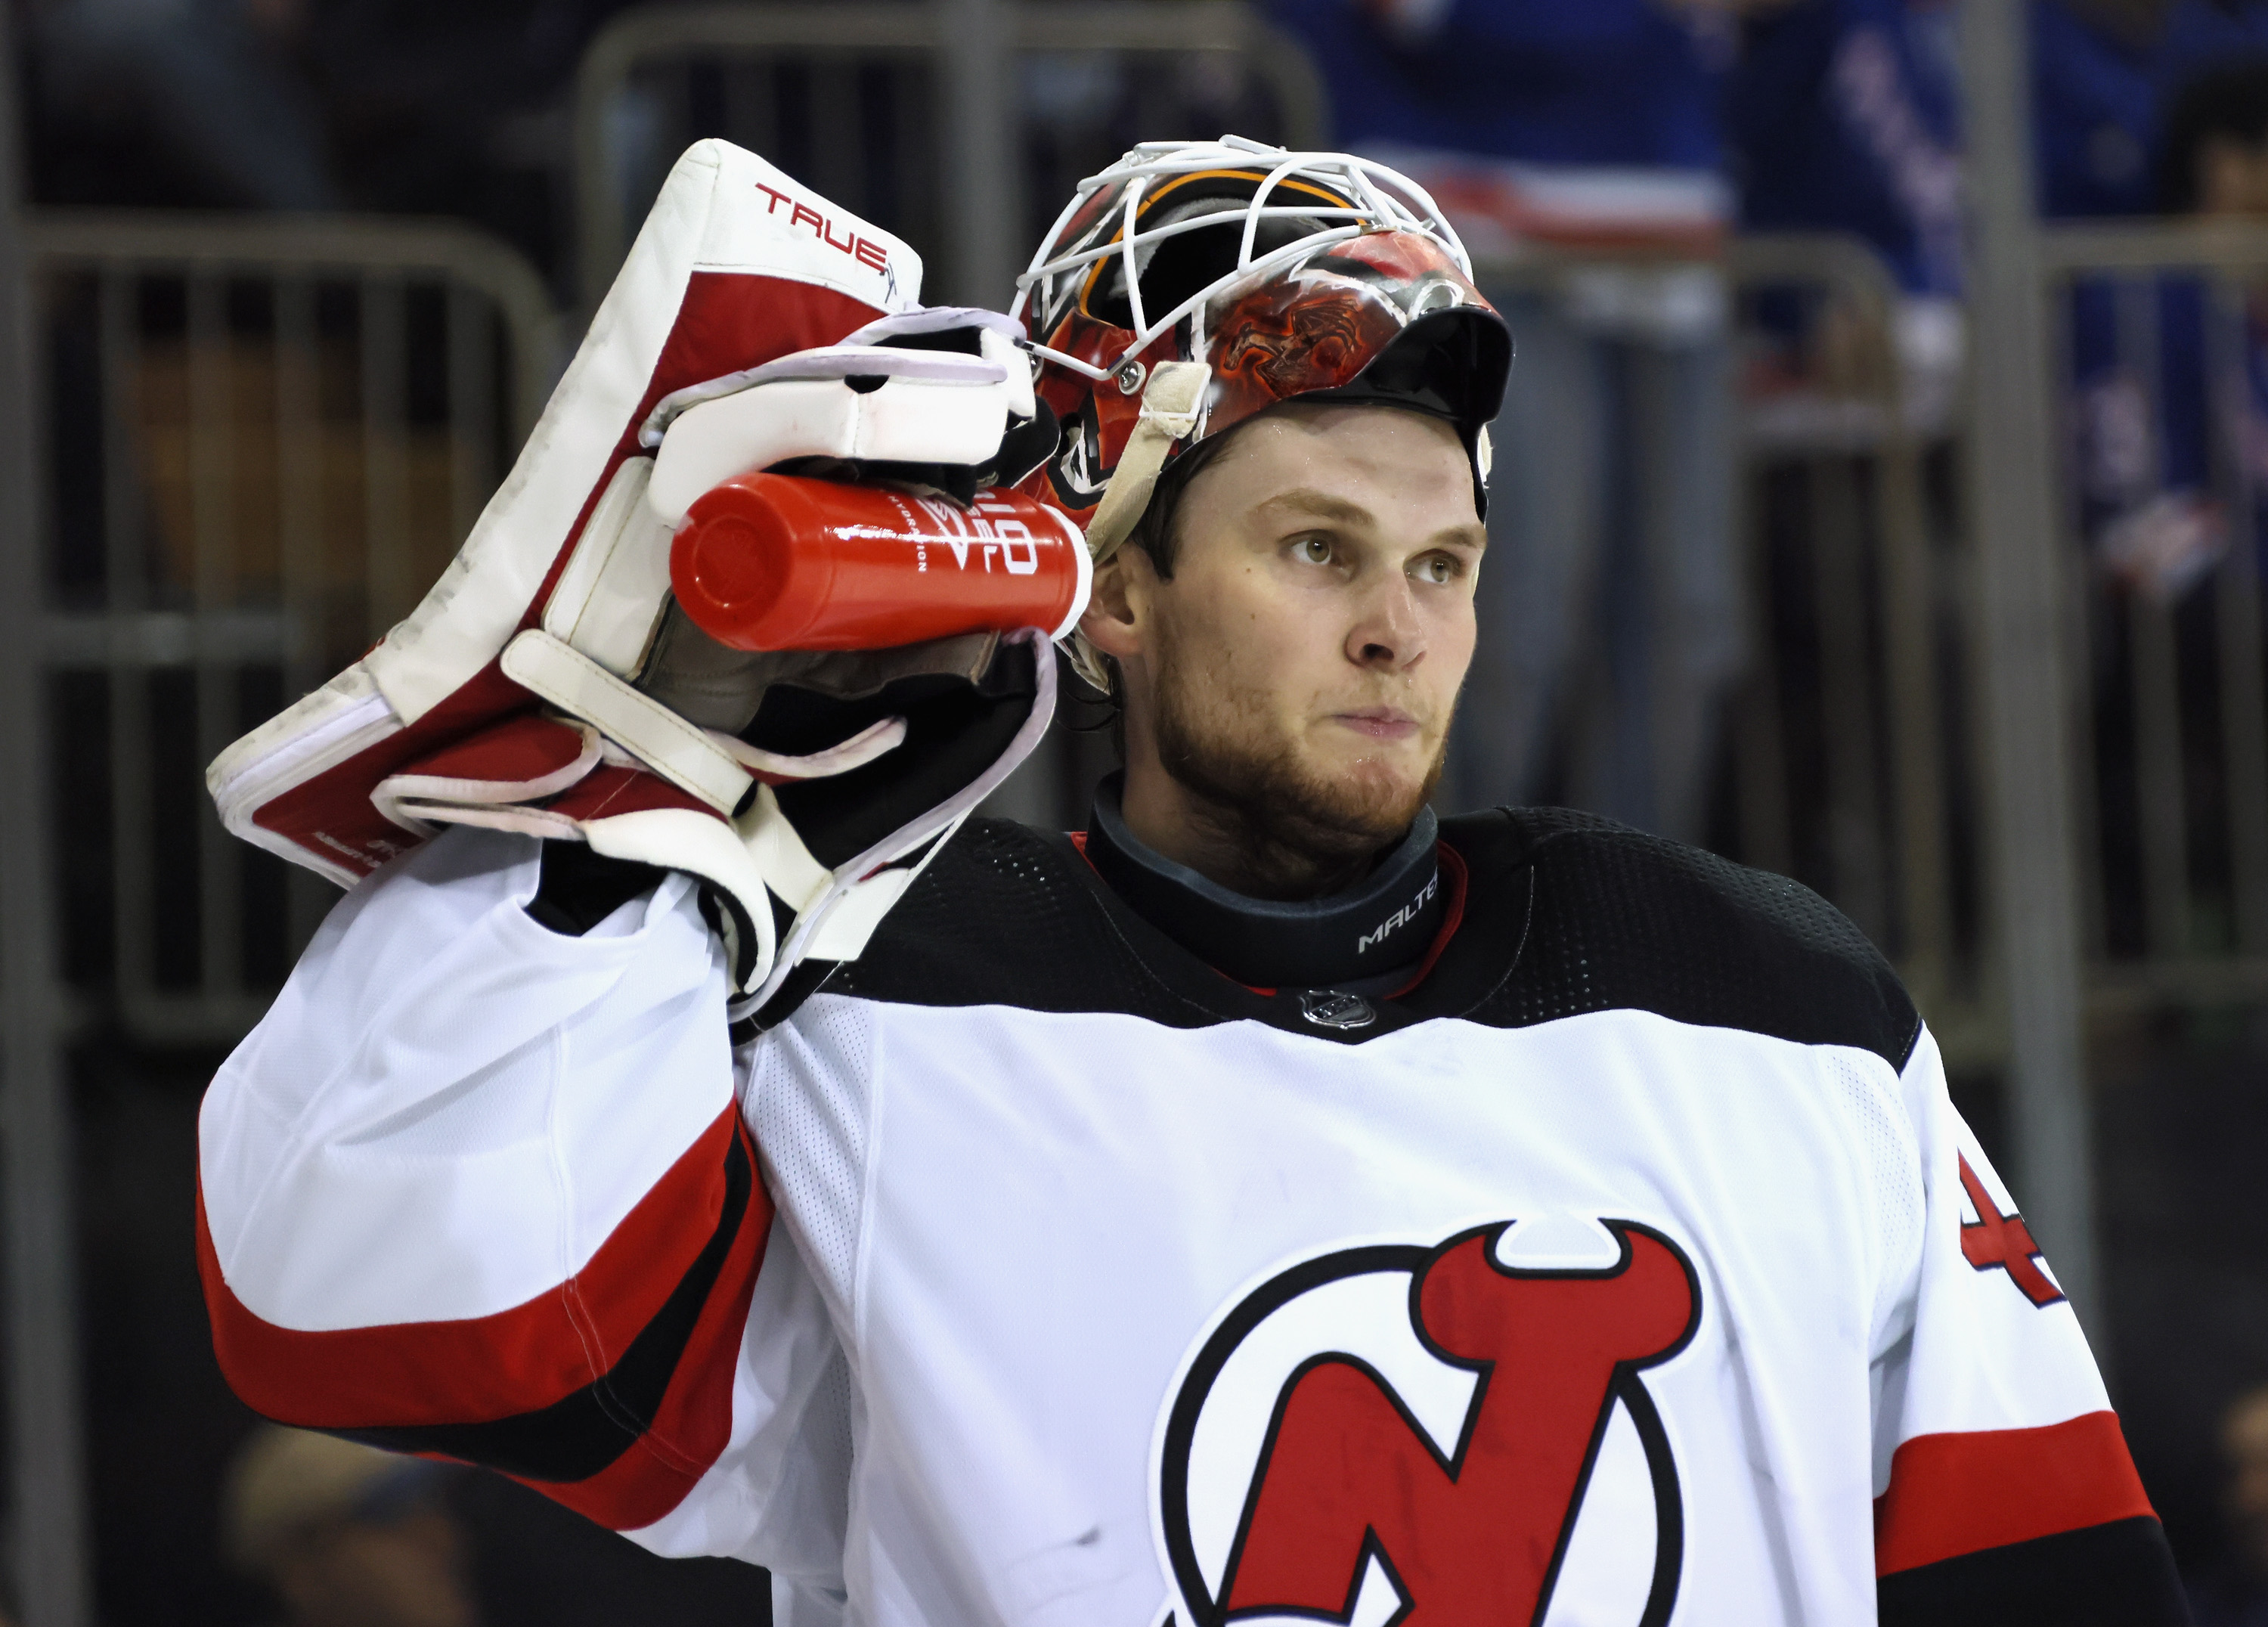 Rangers vs. Devils NHL predictions, picks, odds & playoff picture